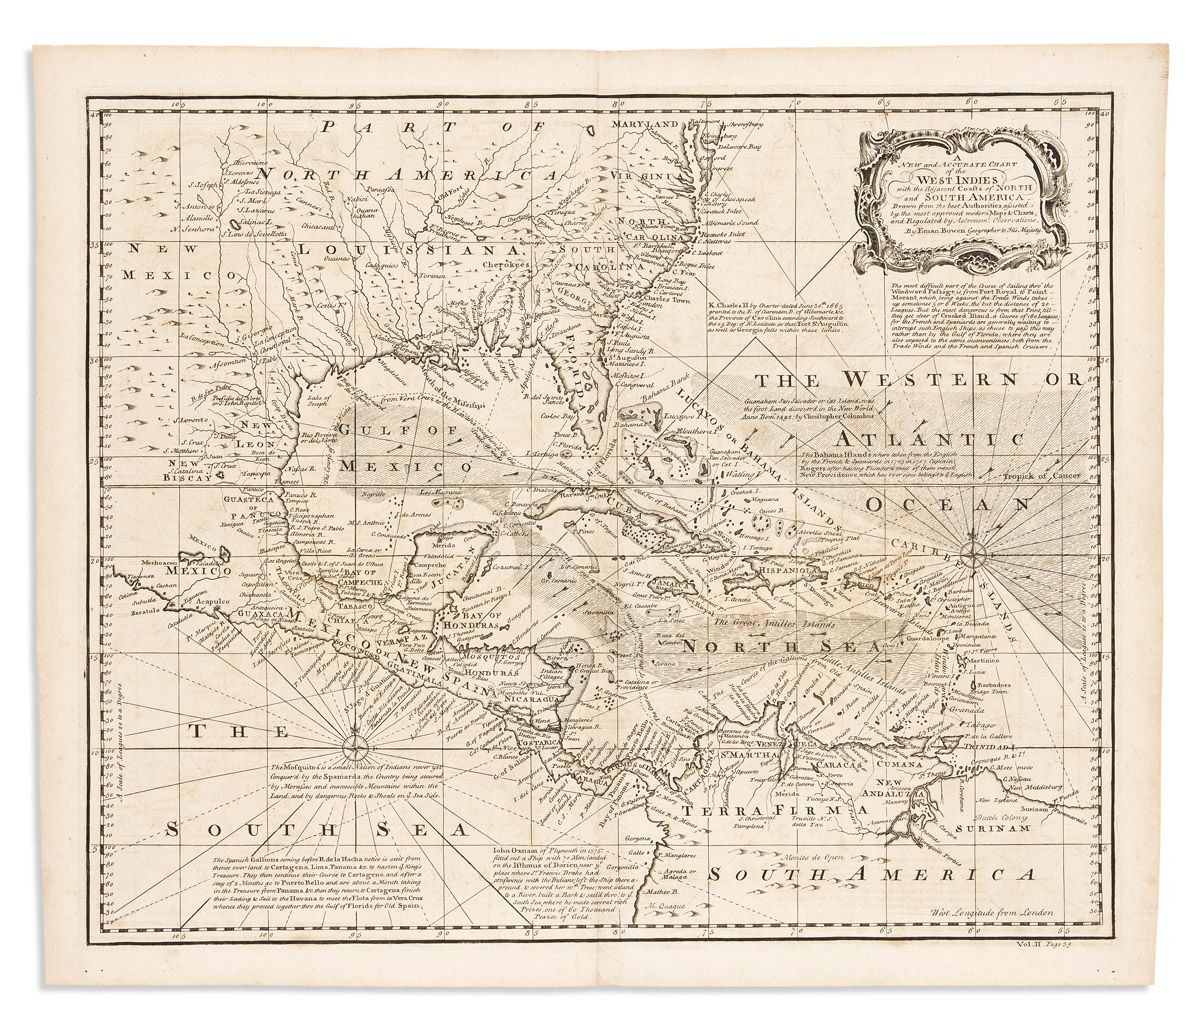 (CARIBBEAN.) Emanuel Bowen. A New and Accurate Chart of the West Indies with the Adjacent Coasts of North and South America.